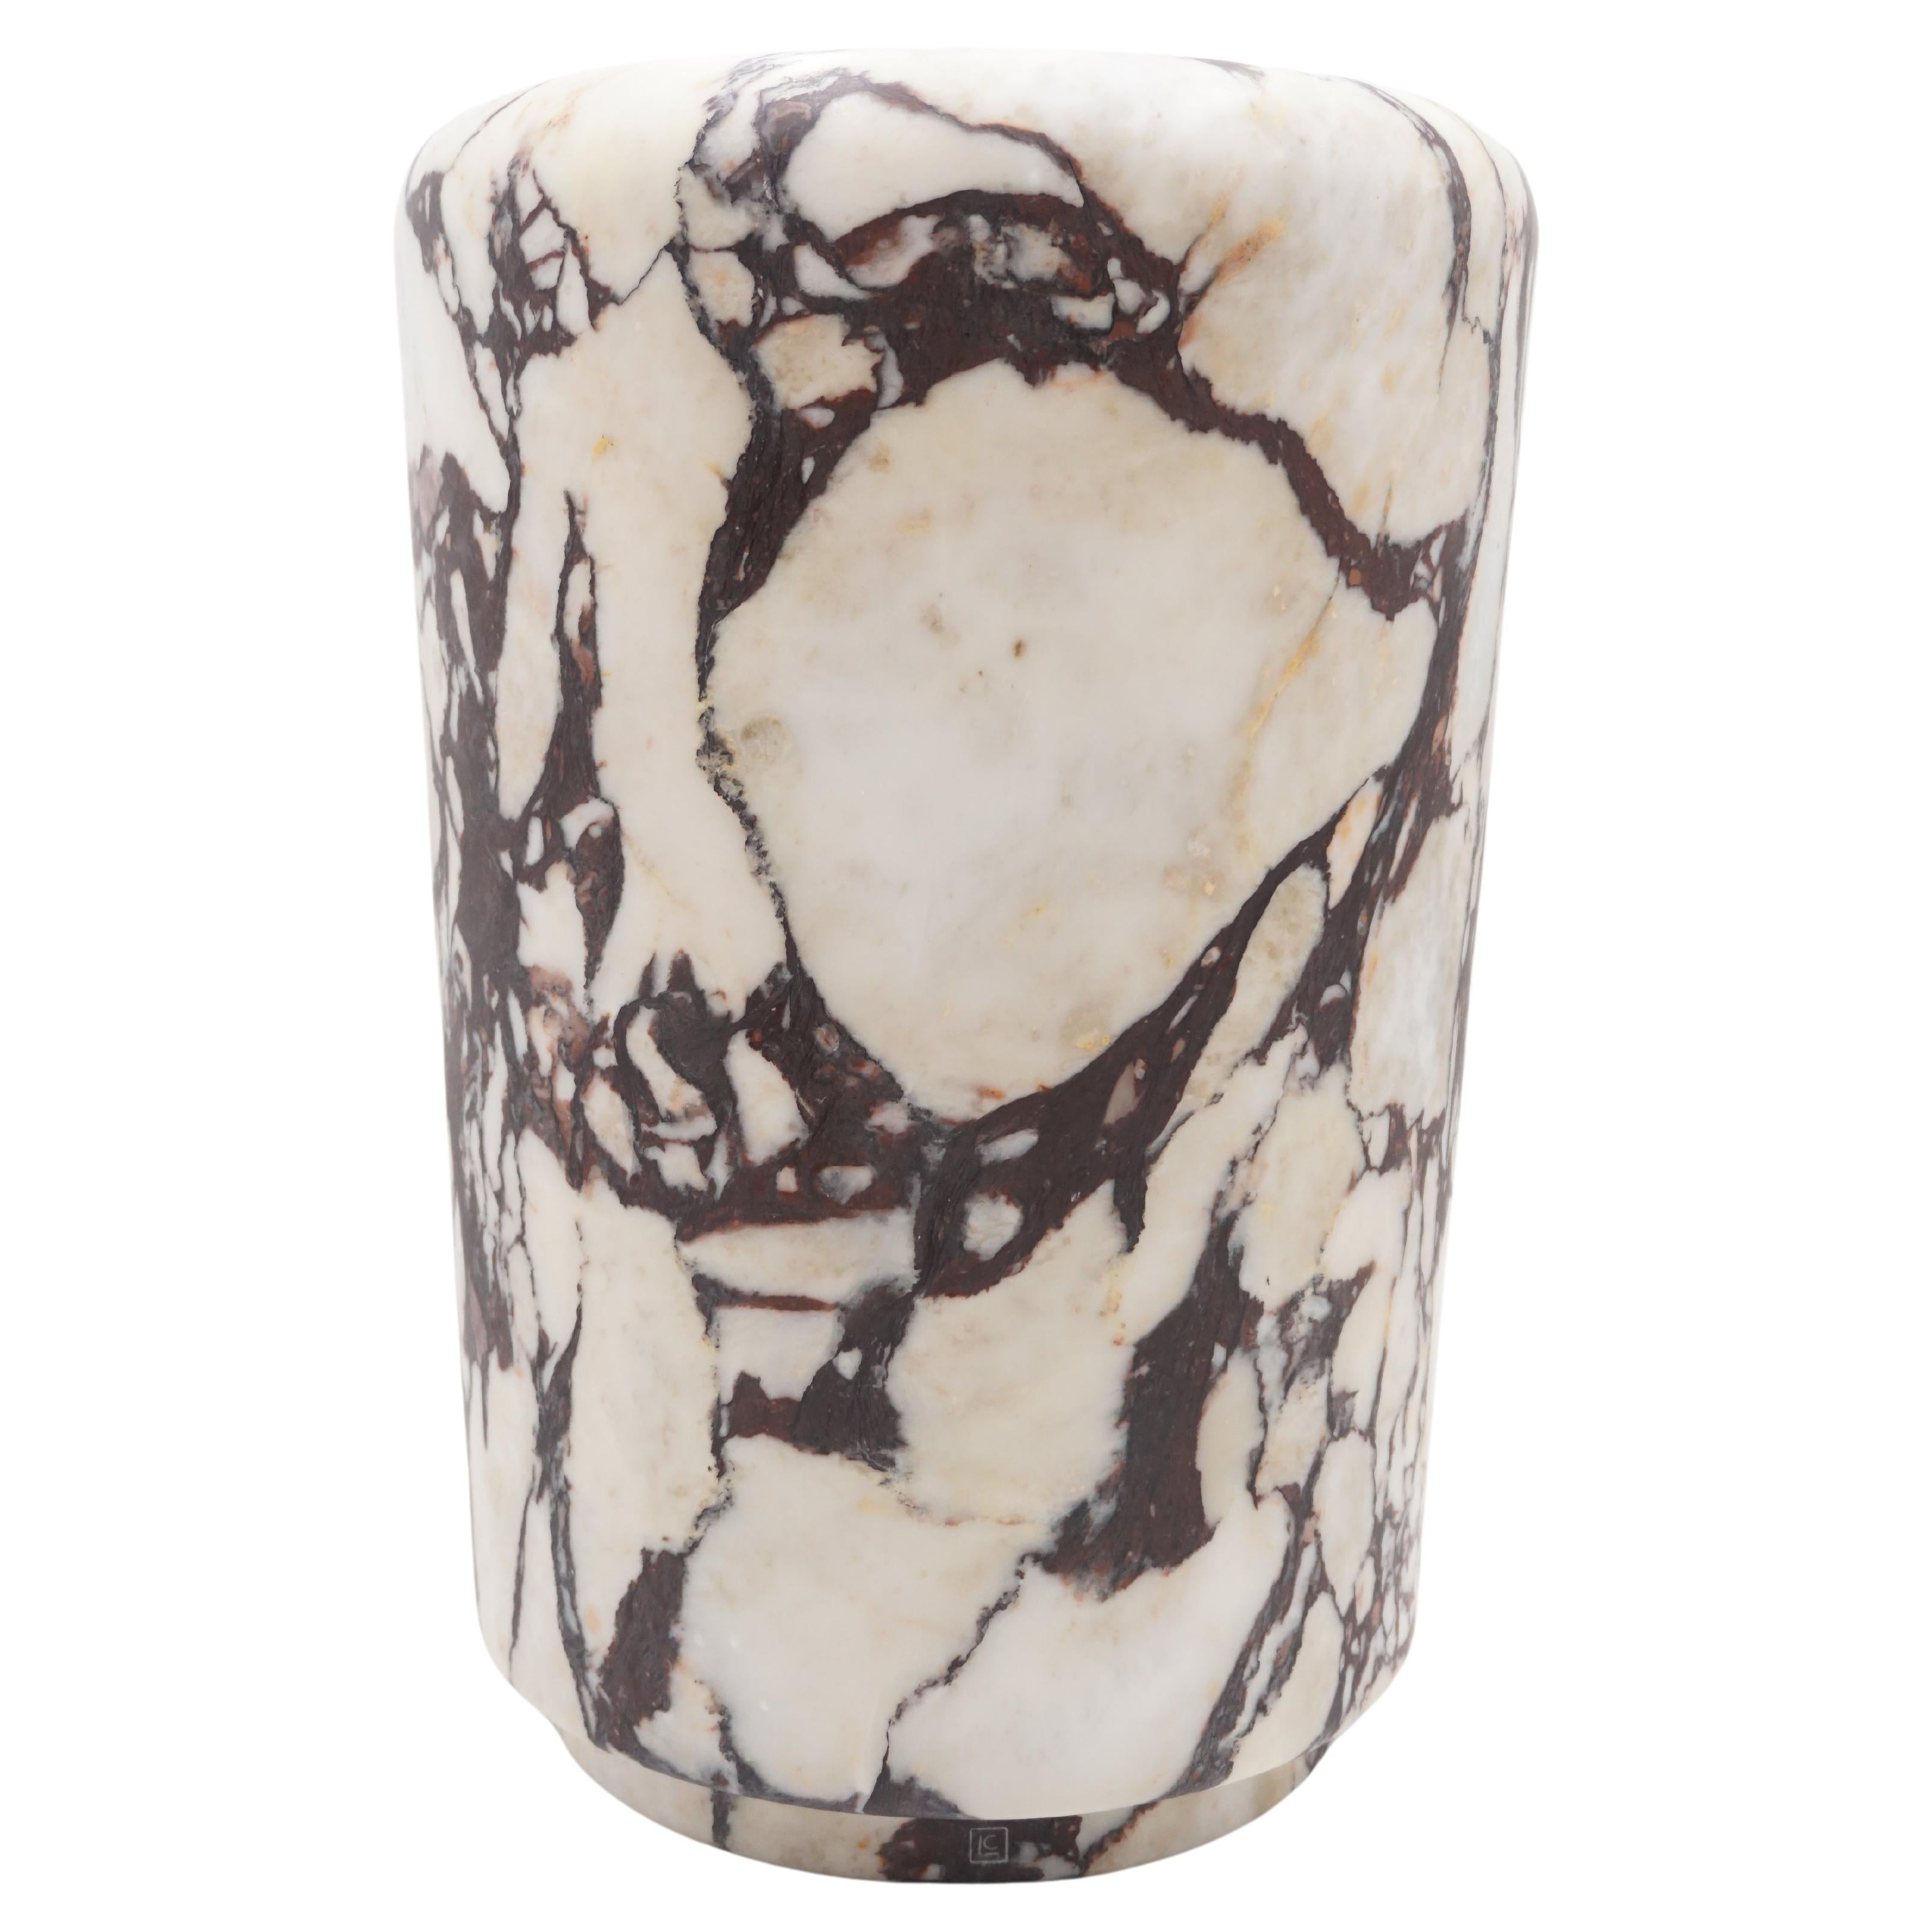 Sculptural Breccia Medicea Marble Stool "Throne of Dioniso" by Lorenzo Ciompi For Sale